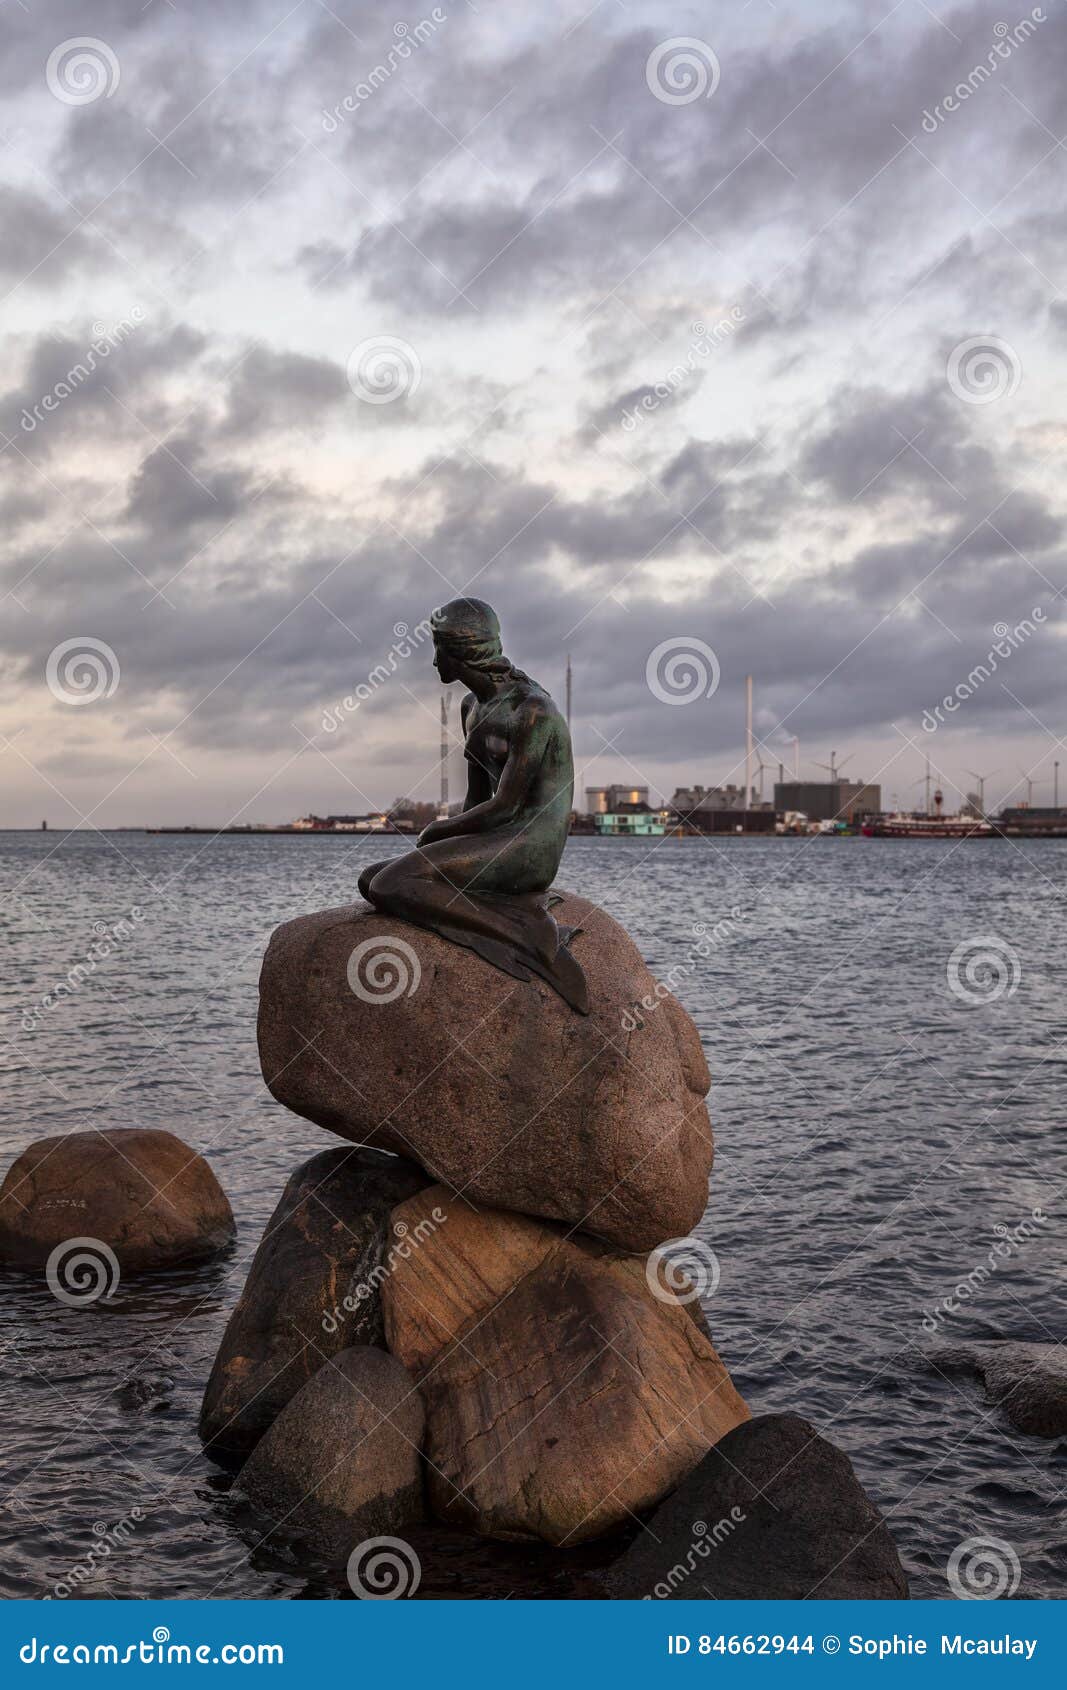 The little mermaid statue editorial stock image. Image of iconic - 84662944